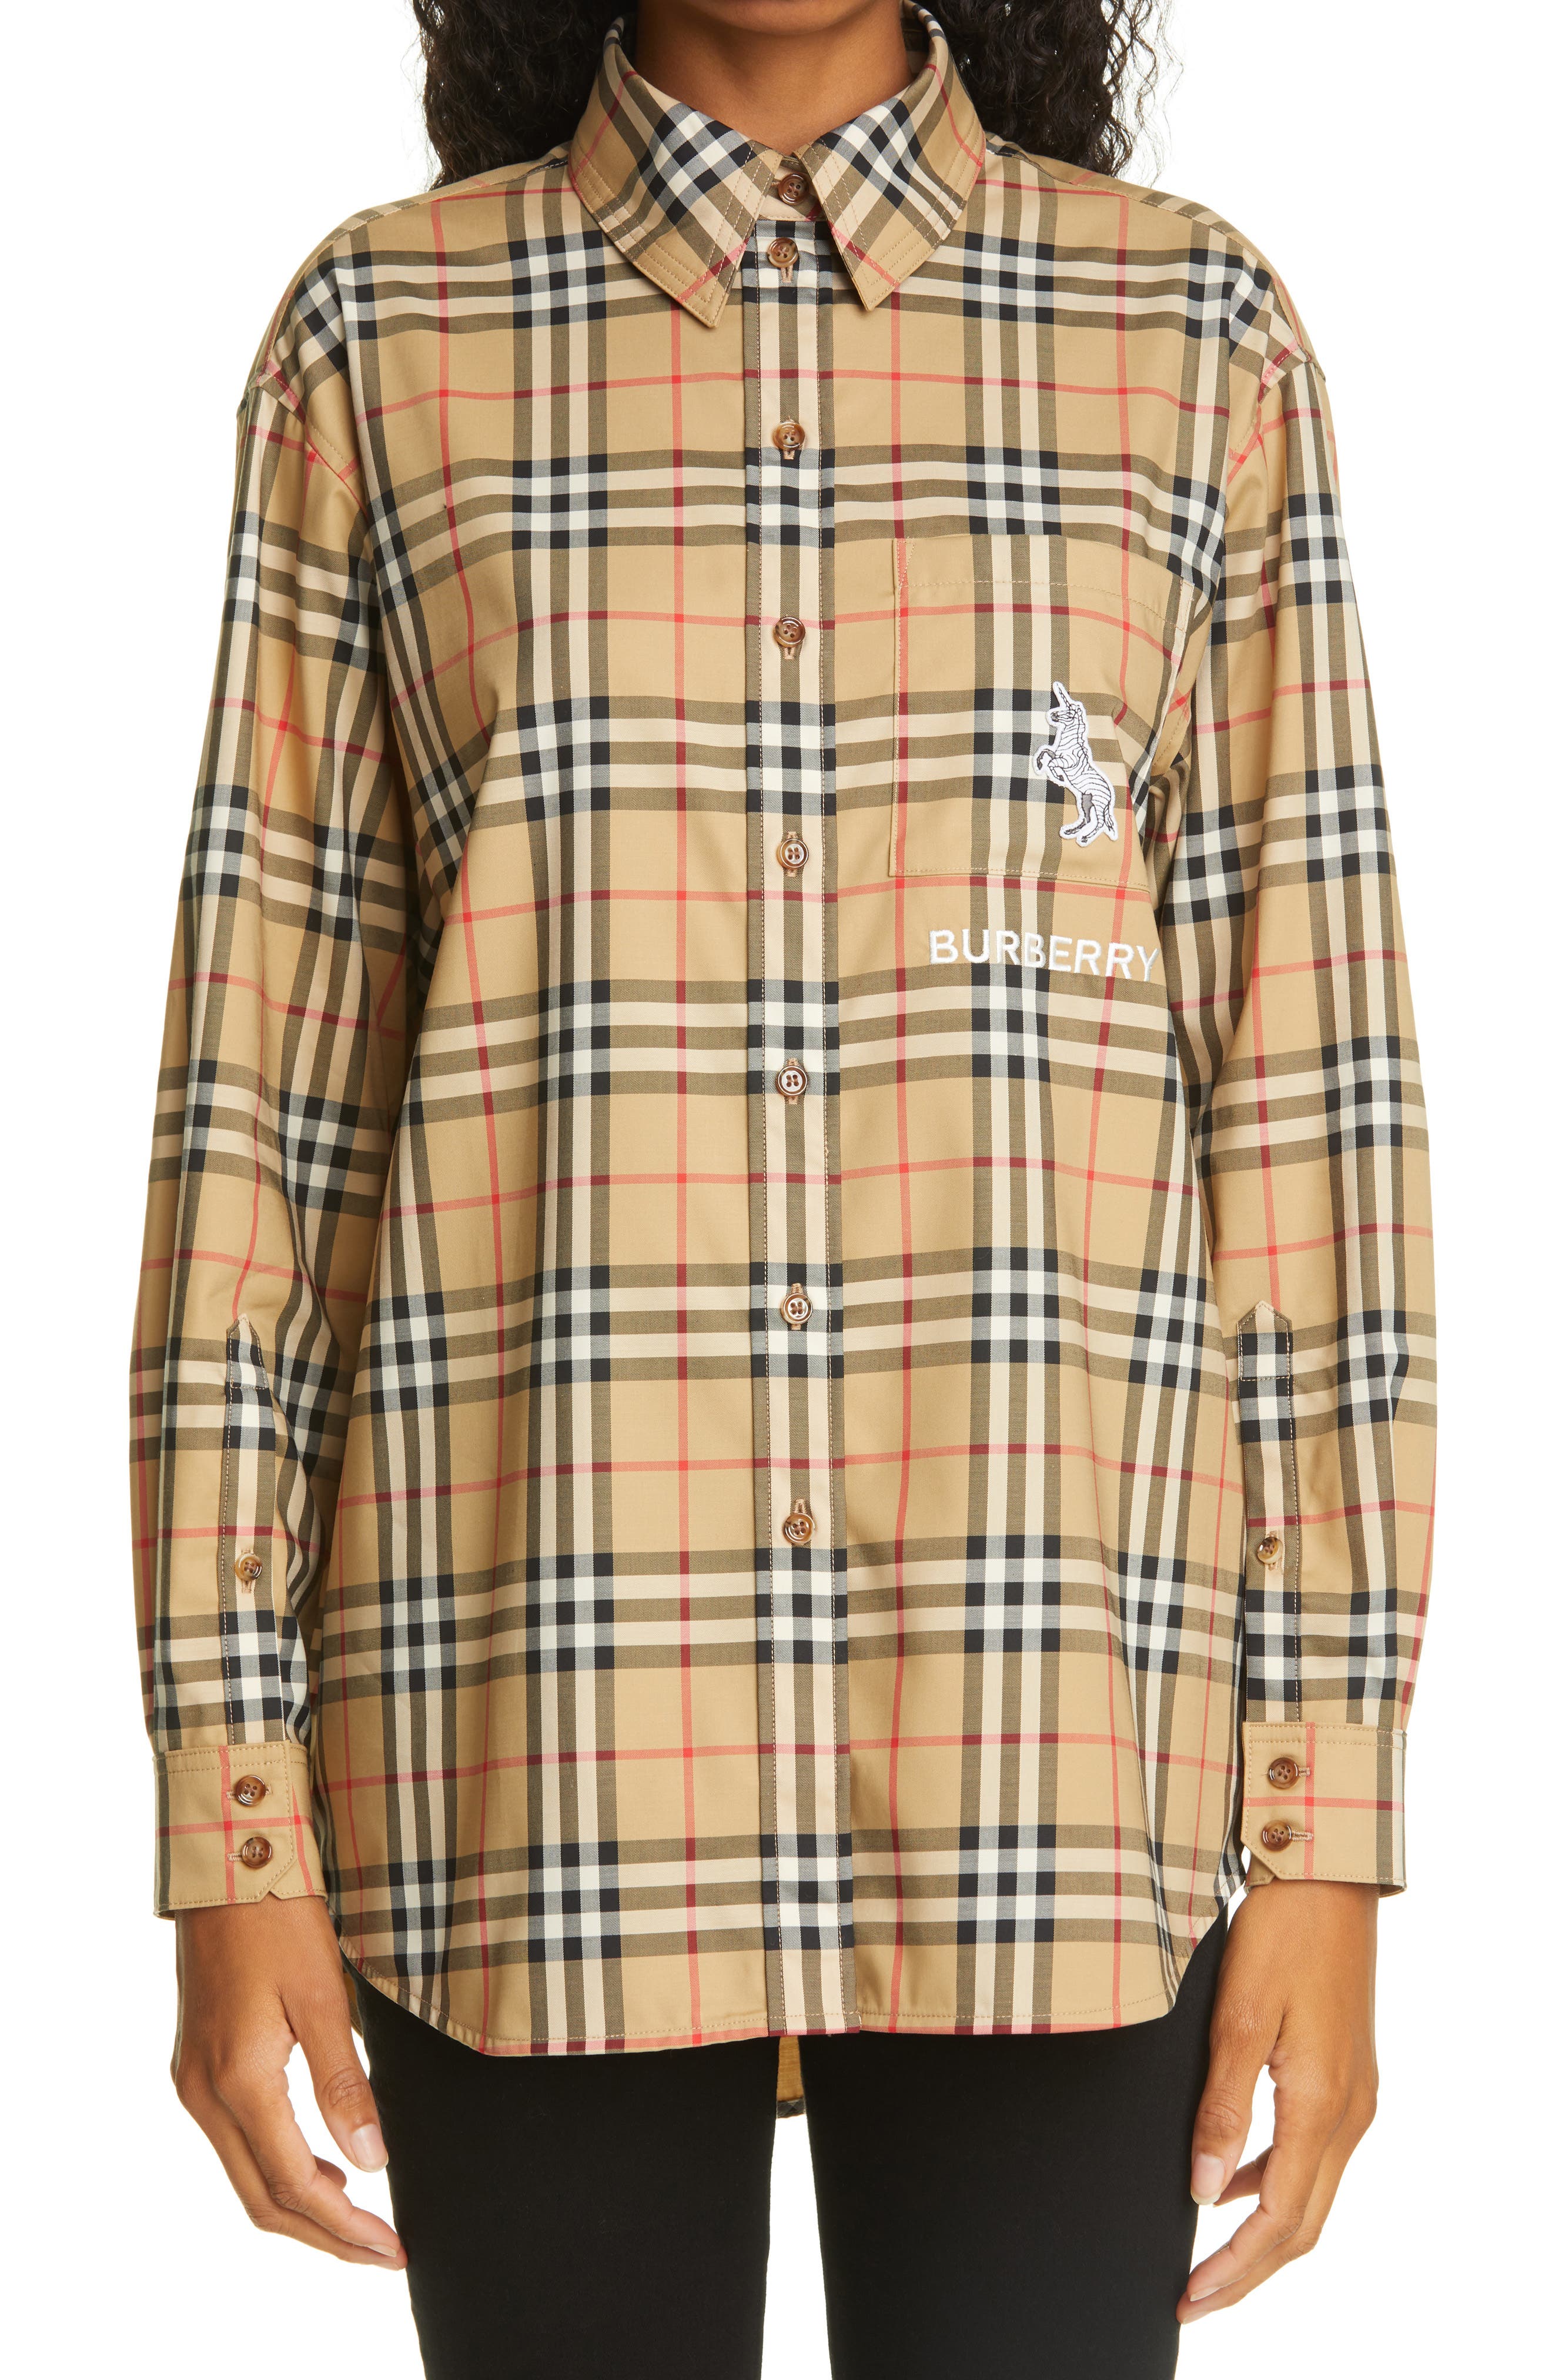 burberry clothing womens